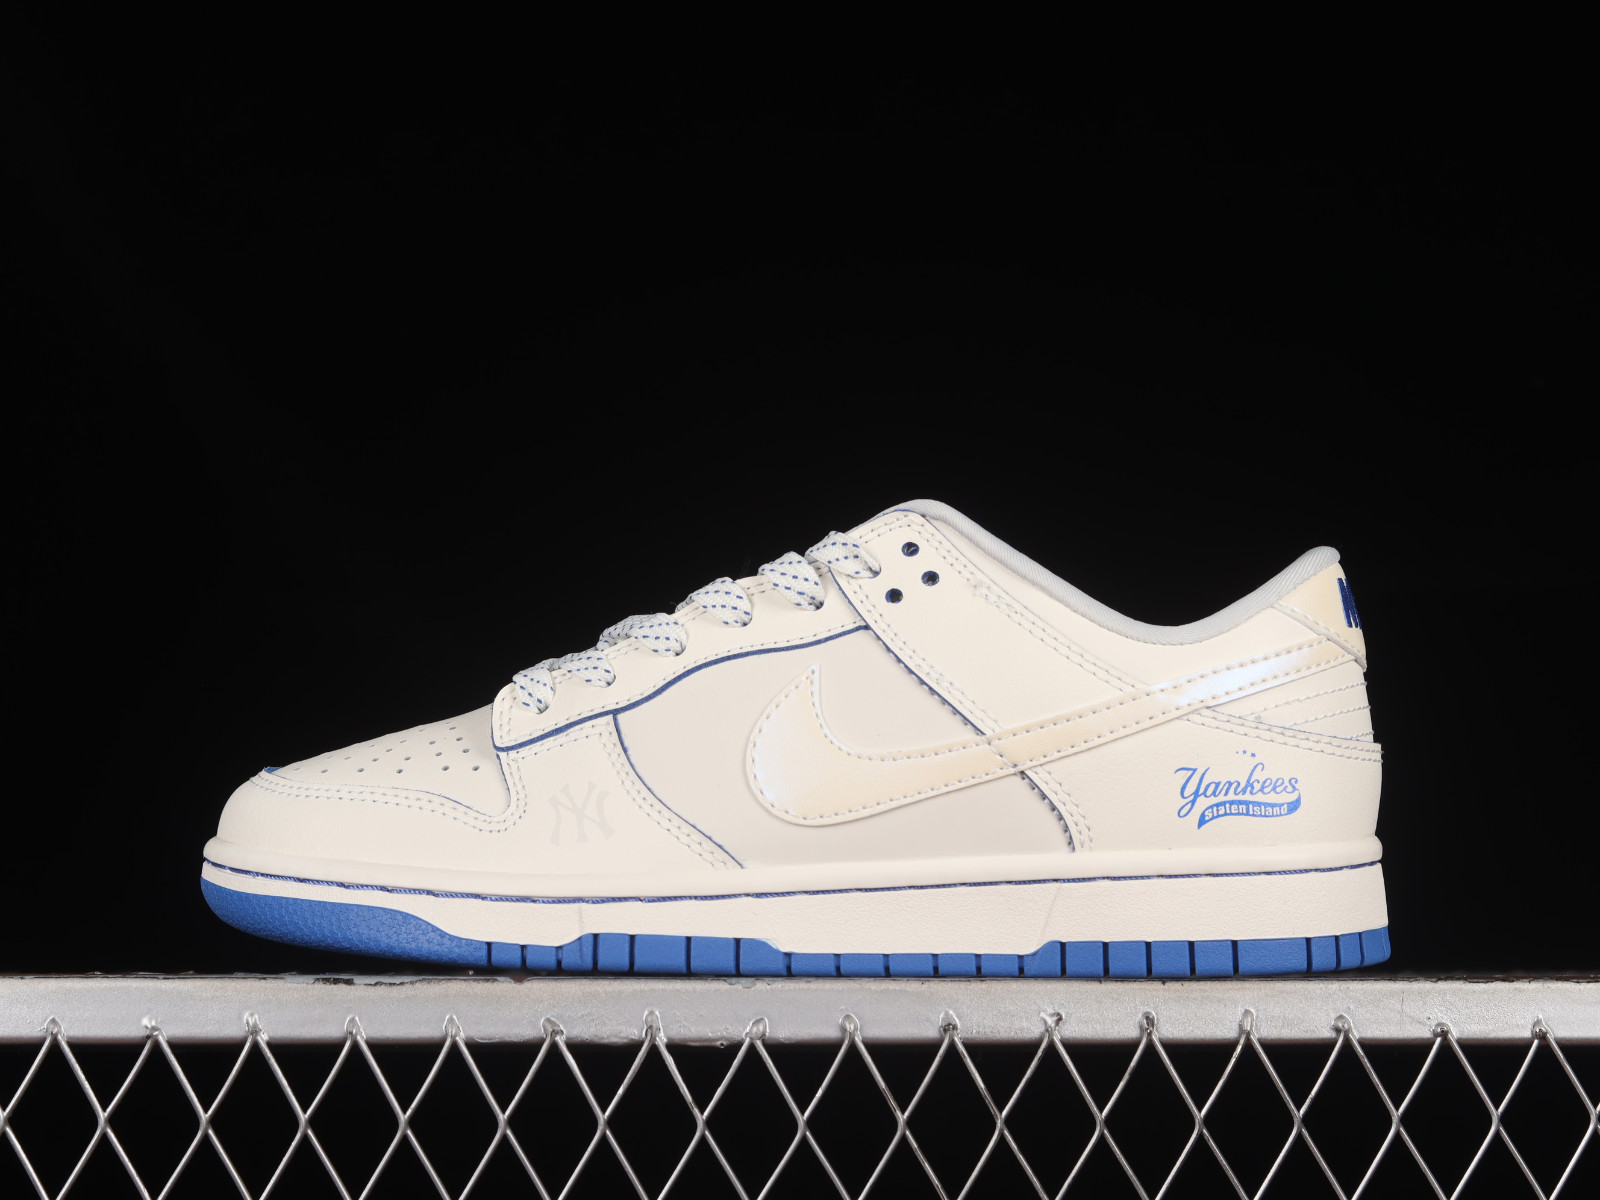 puberteit Identificeren combinatie 800 - Nike SB Dunk Low MLB Pearlescent White Navy Blue FC1688 - rose gold  nike air force high tops shoes sale 2016 - GmarShops